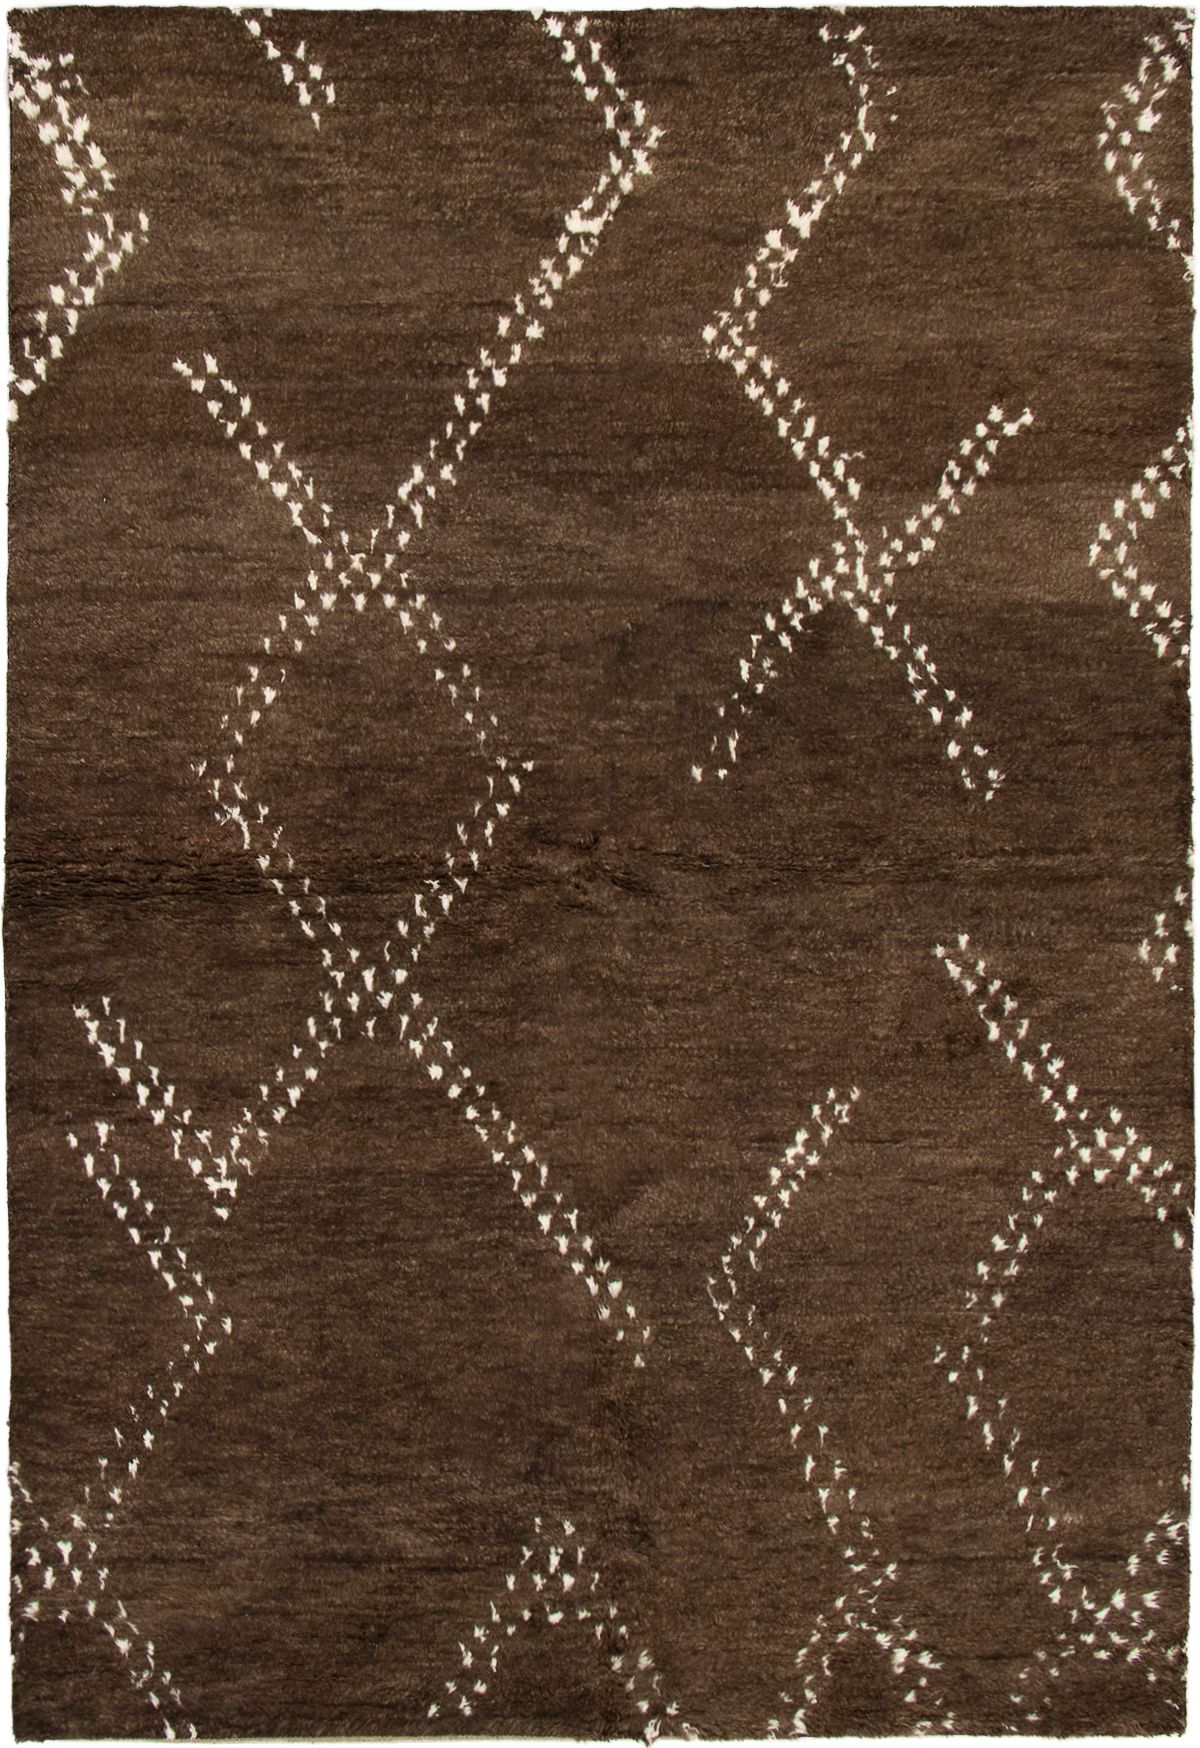 Hand-knotted Arlequin Brown Wool Rug 6'3" x 9'1" Size: 6'3" x 9'1"  